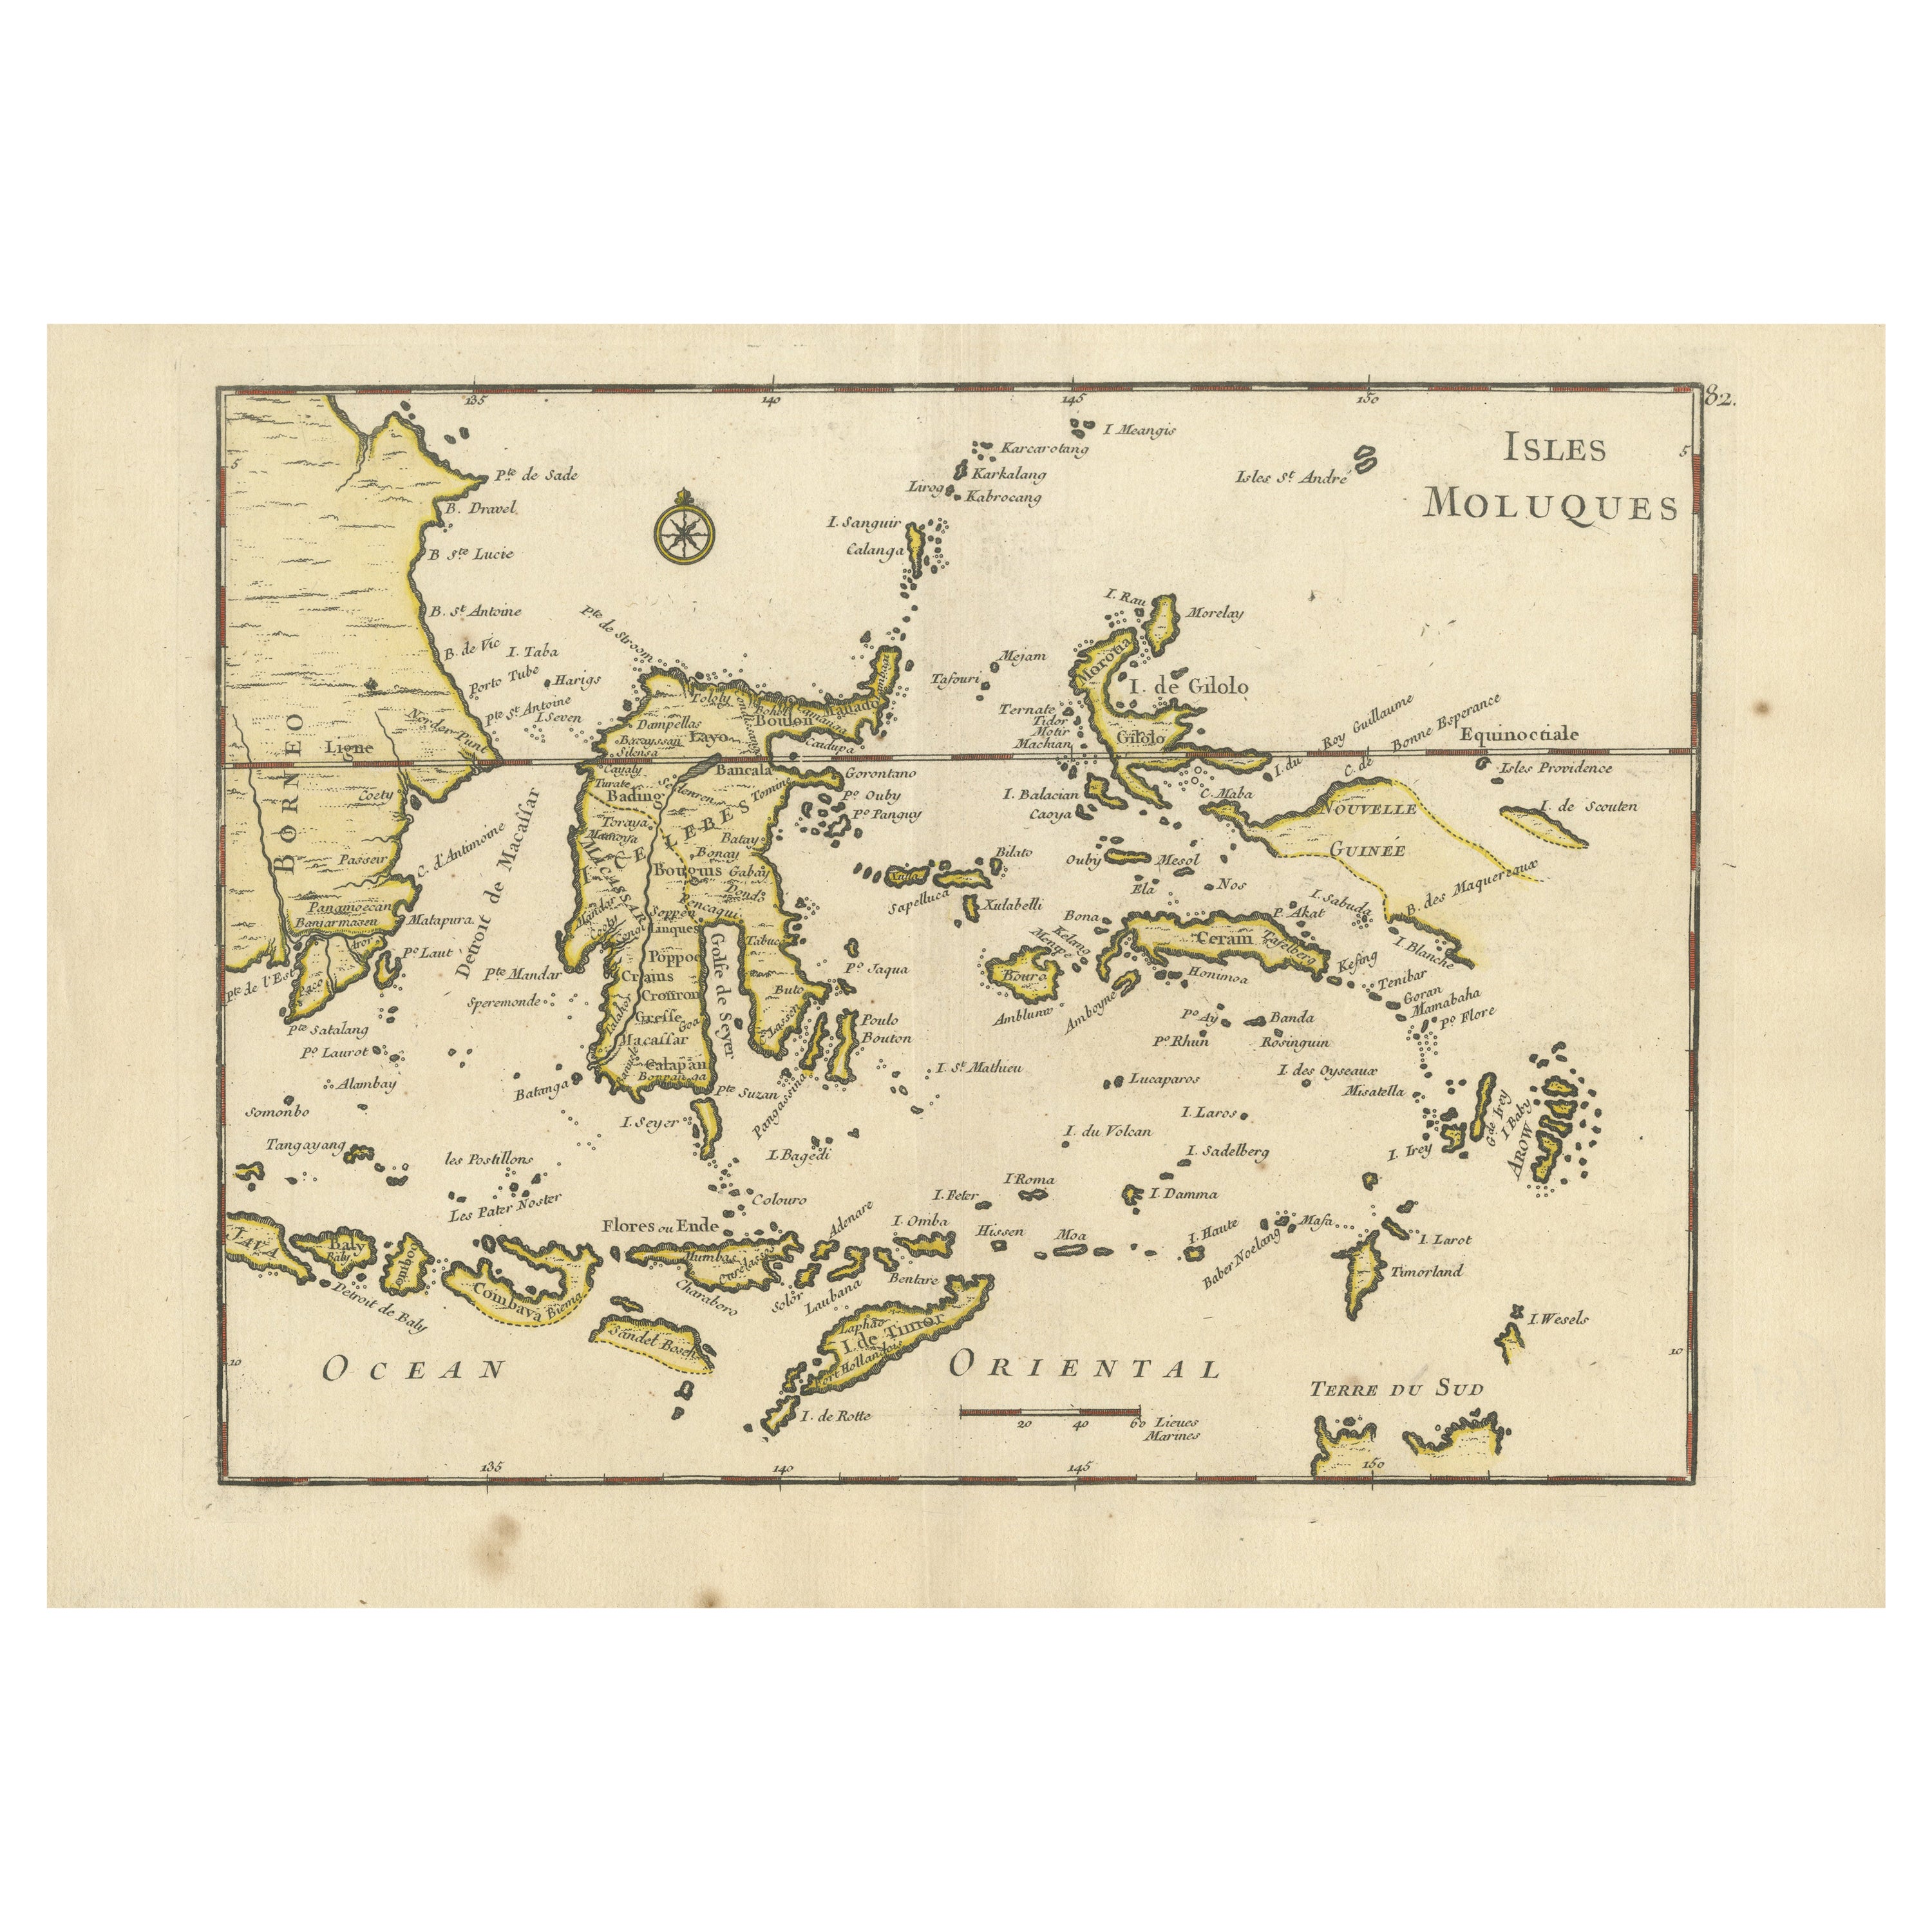 Old Original Antique Map of the Islands of East Indonesia, 1756